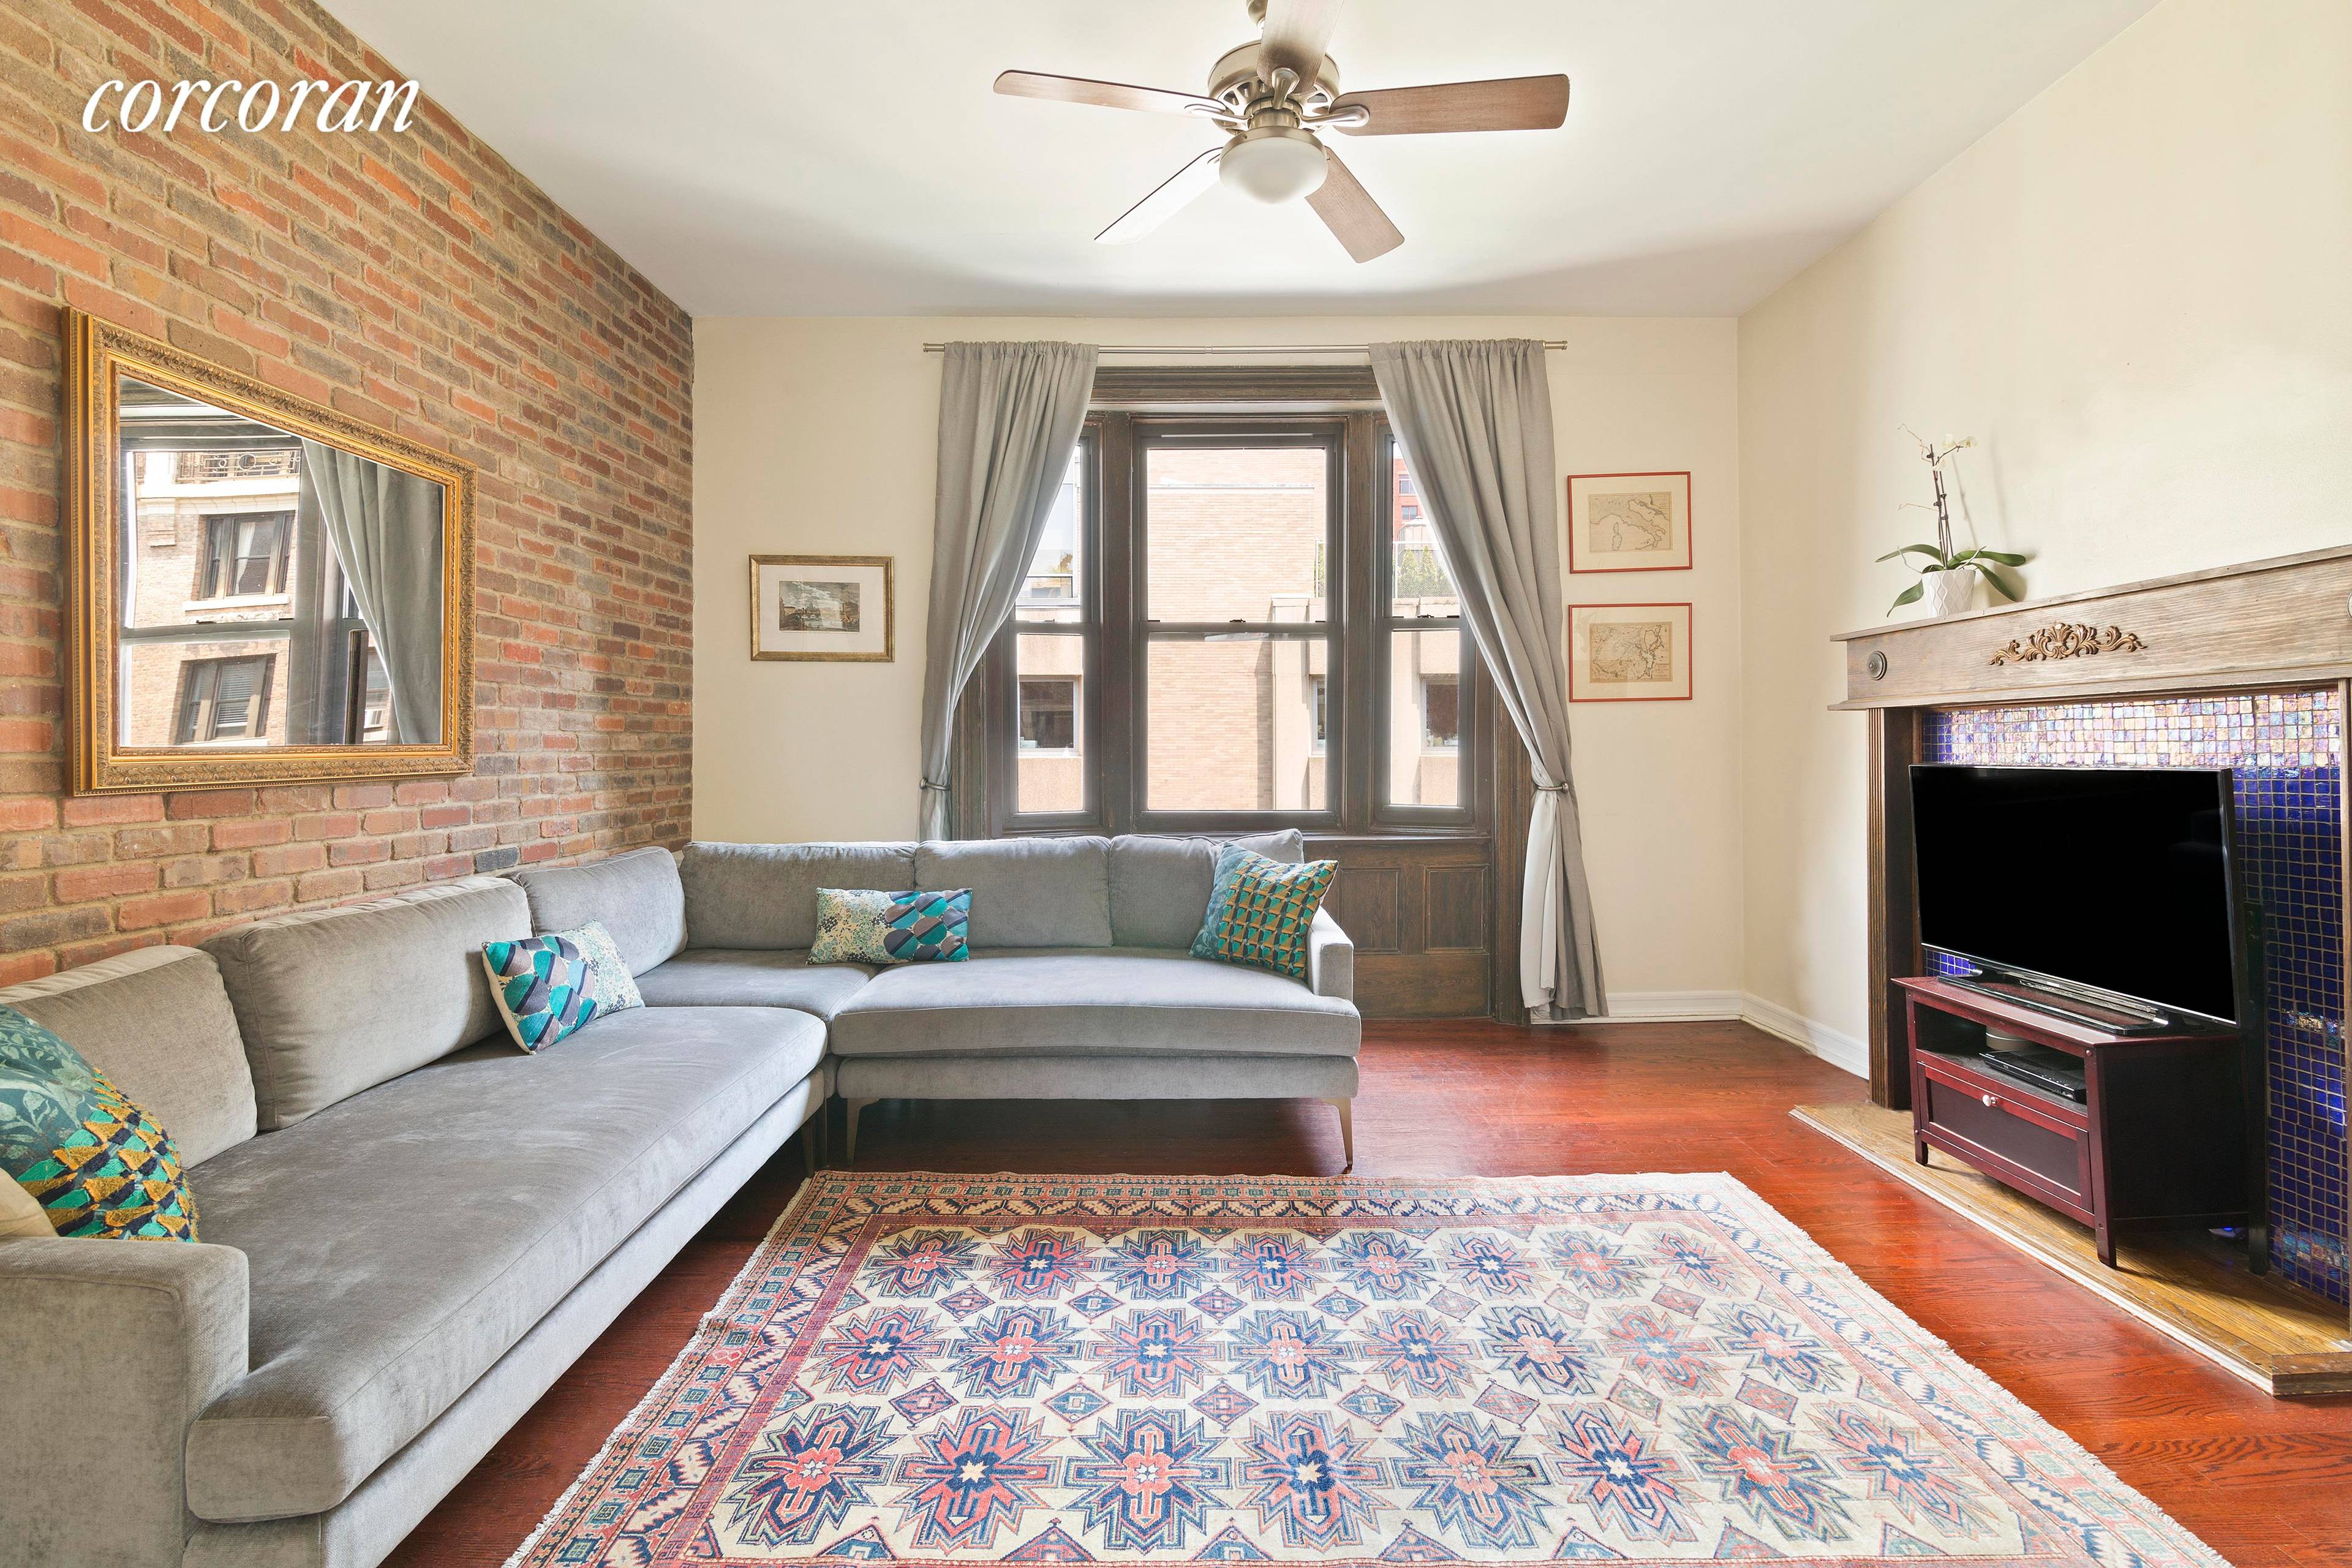 Welcome home to 622 West 114th Street, Apt 61.